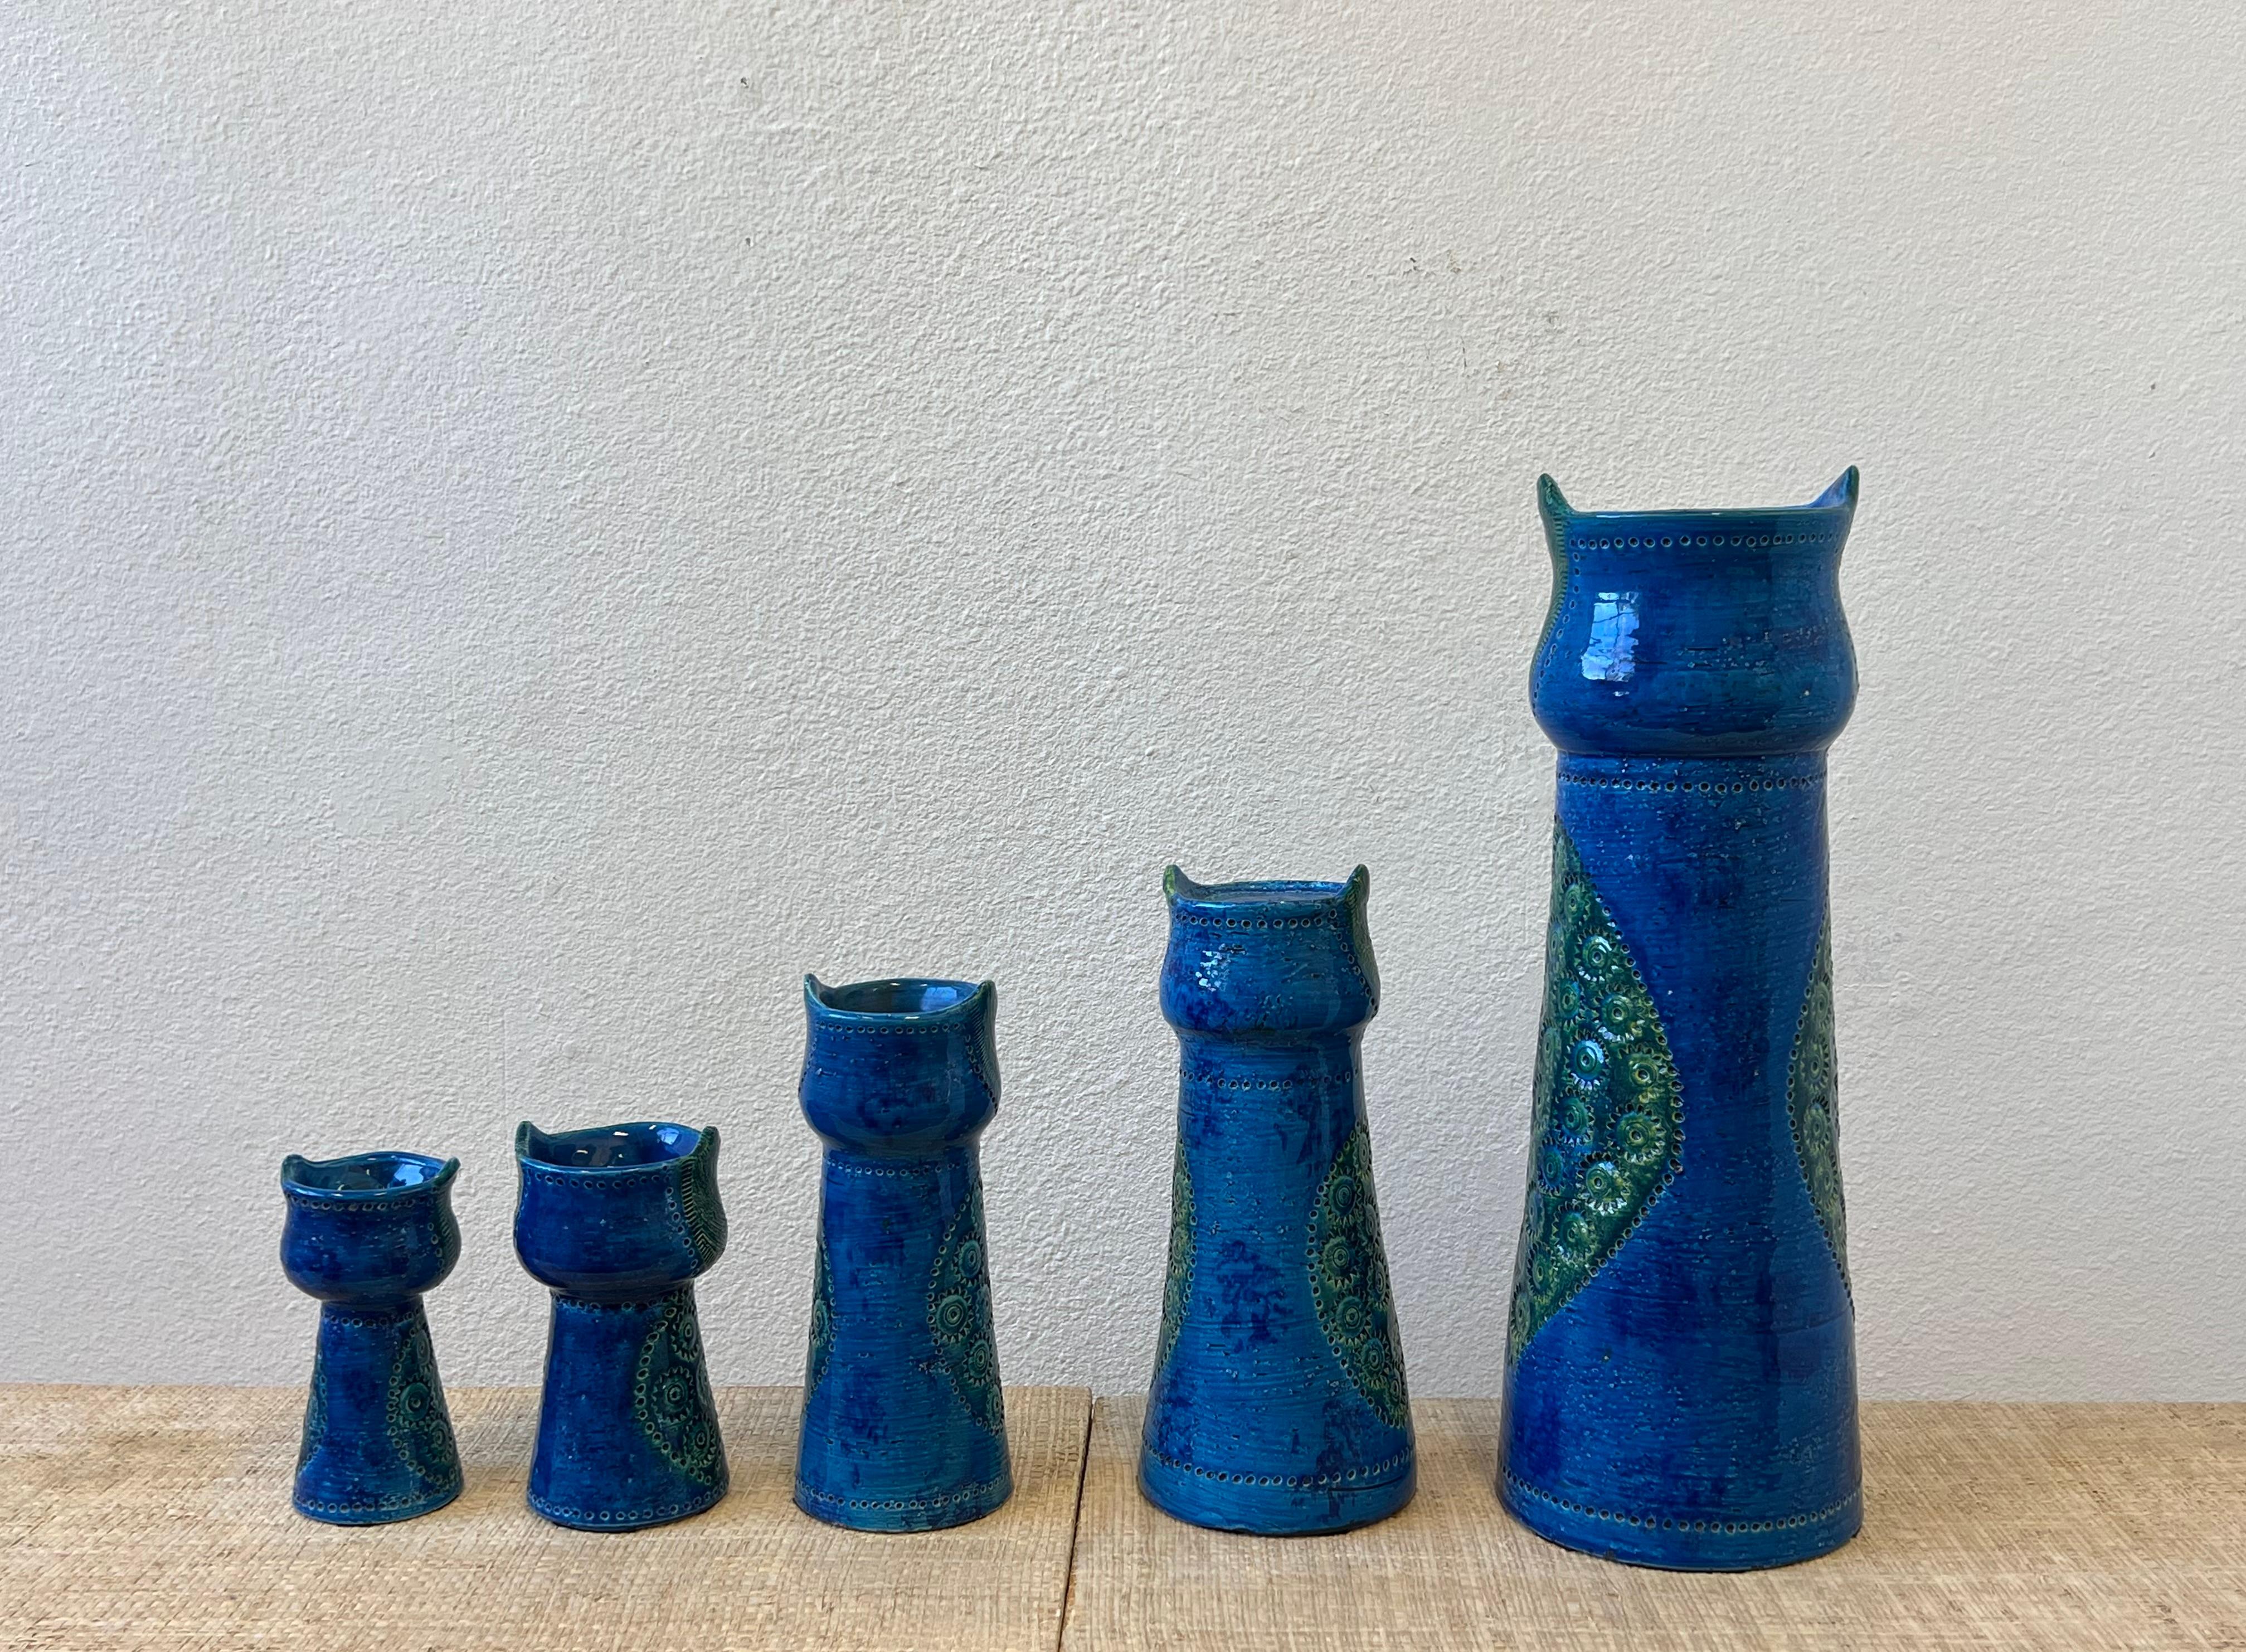 1960’s Rare grouping of five Italian “ Rimini Blue” ceramic owls by Aldo Londi for Bitossi. 
They are in beautiful vintage condition. The grouping consist of three vases and two candleholders. 

The tallest is 19.75” High, 7” Diameter, the smaller